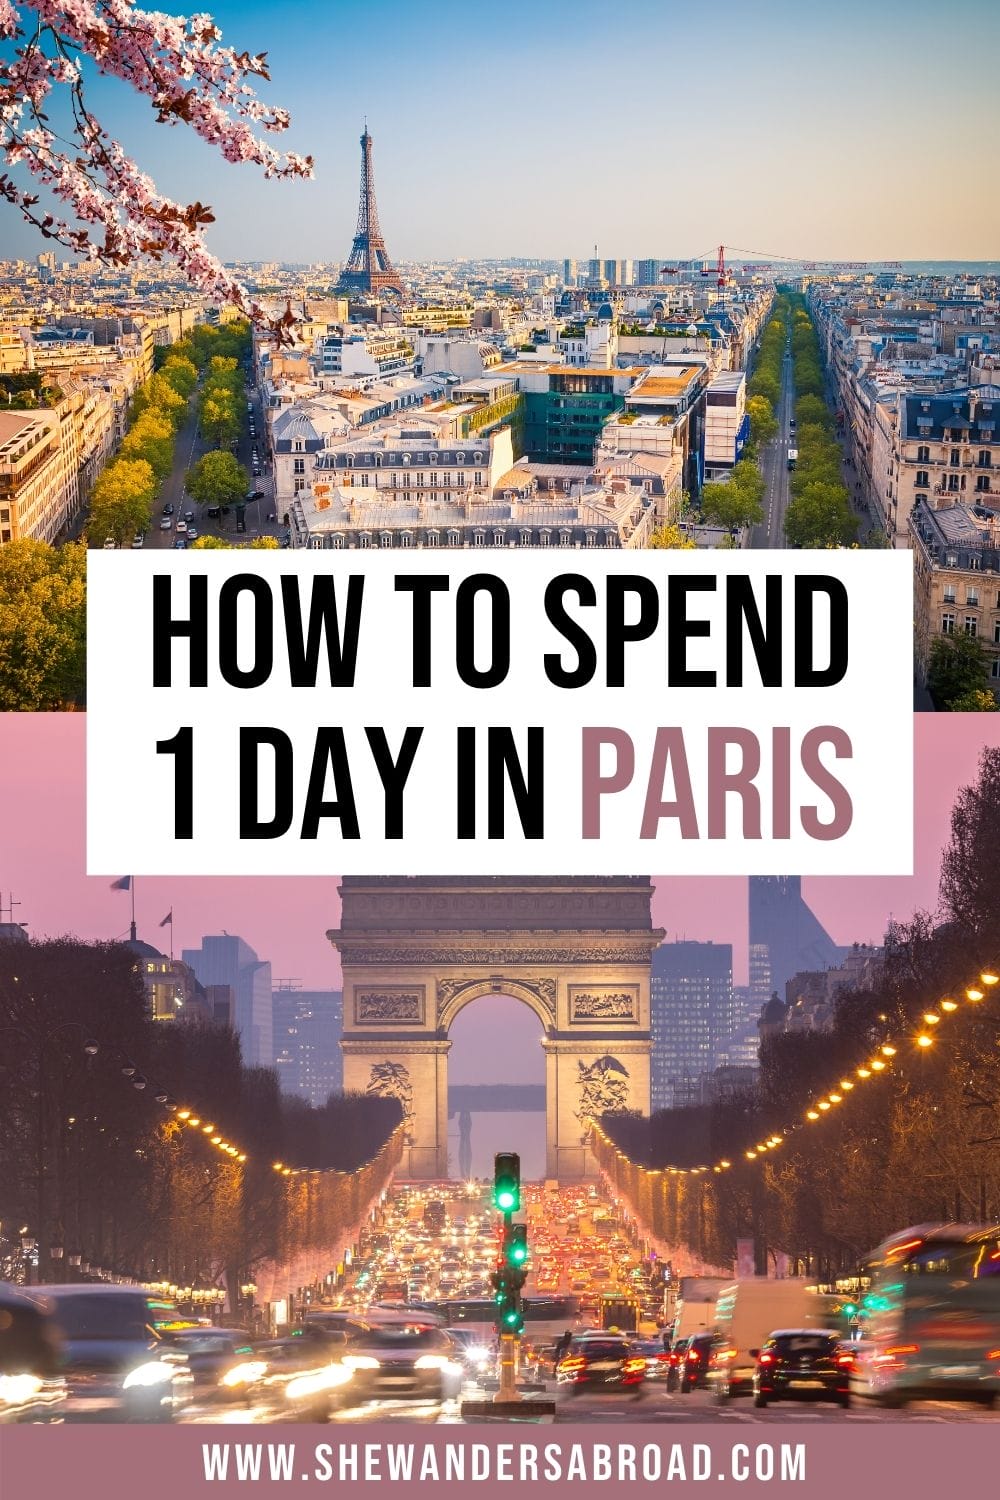 One Day in Paris Itinerary: How to See the Best of Paris in a Day